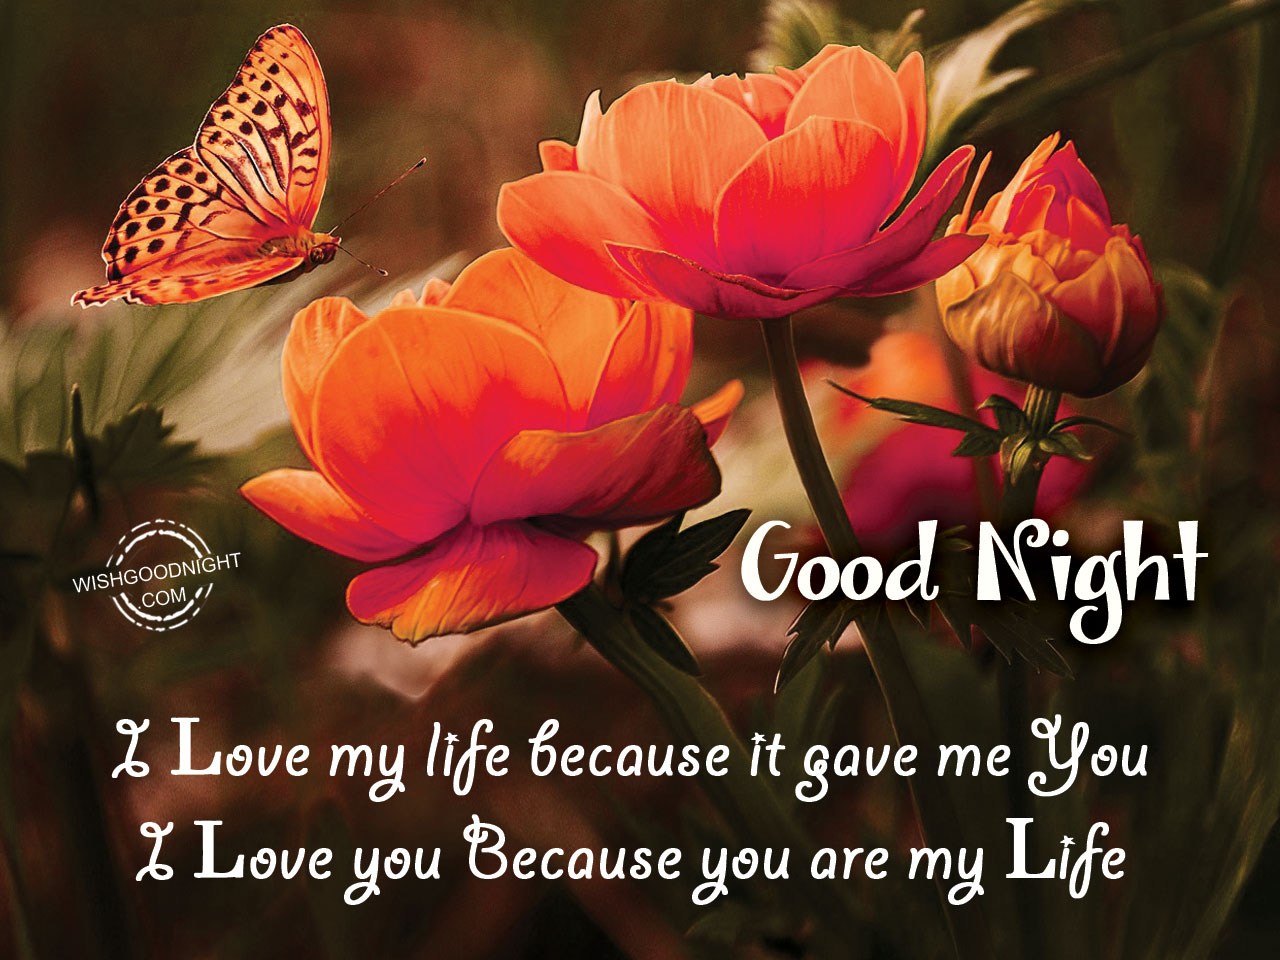 Good Night Wishes for Husband - Goodnight Quotes for Hubby